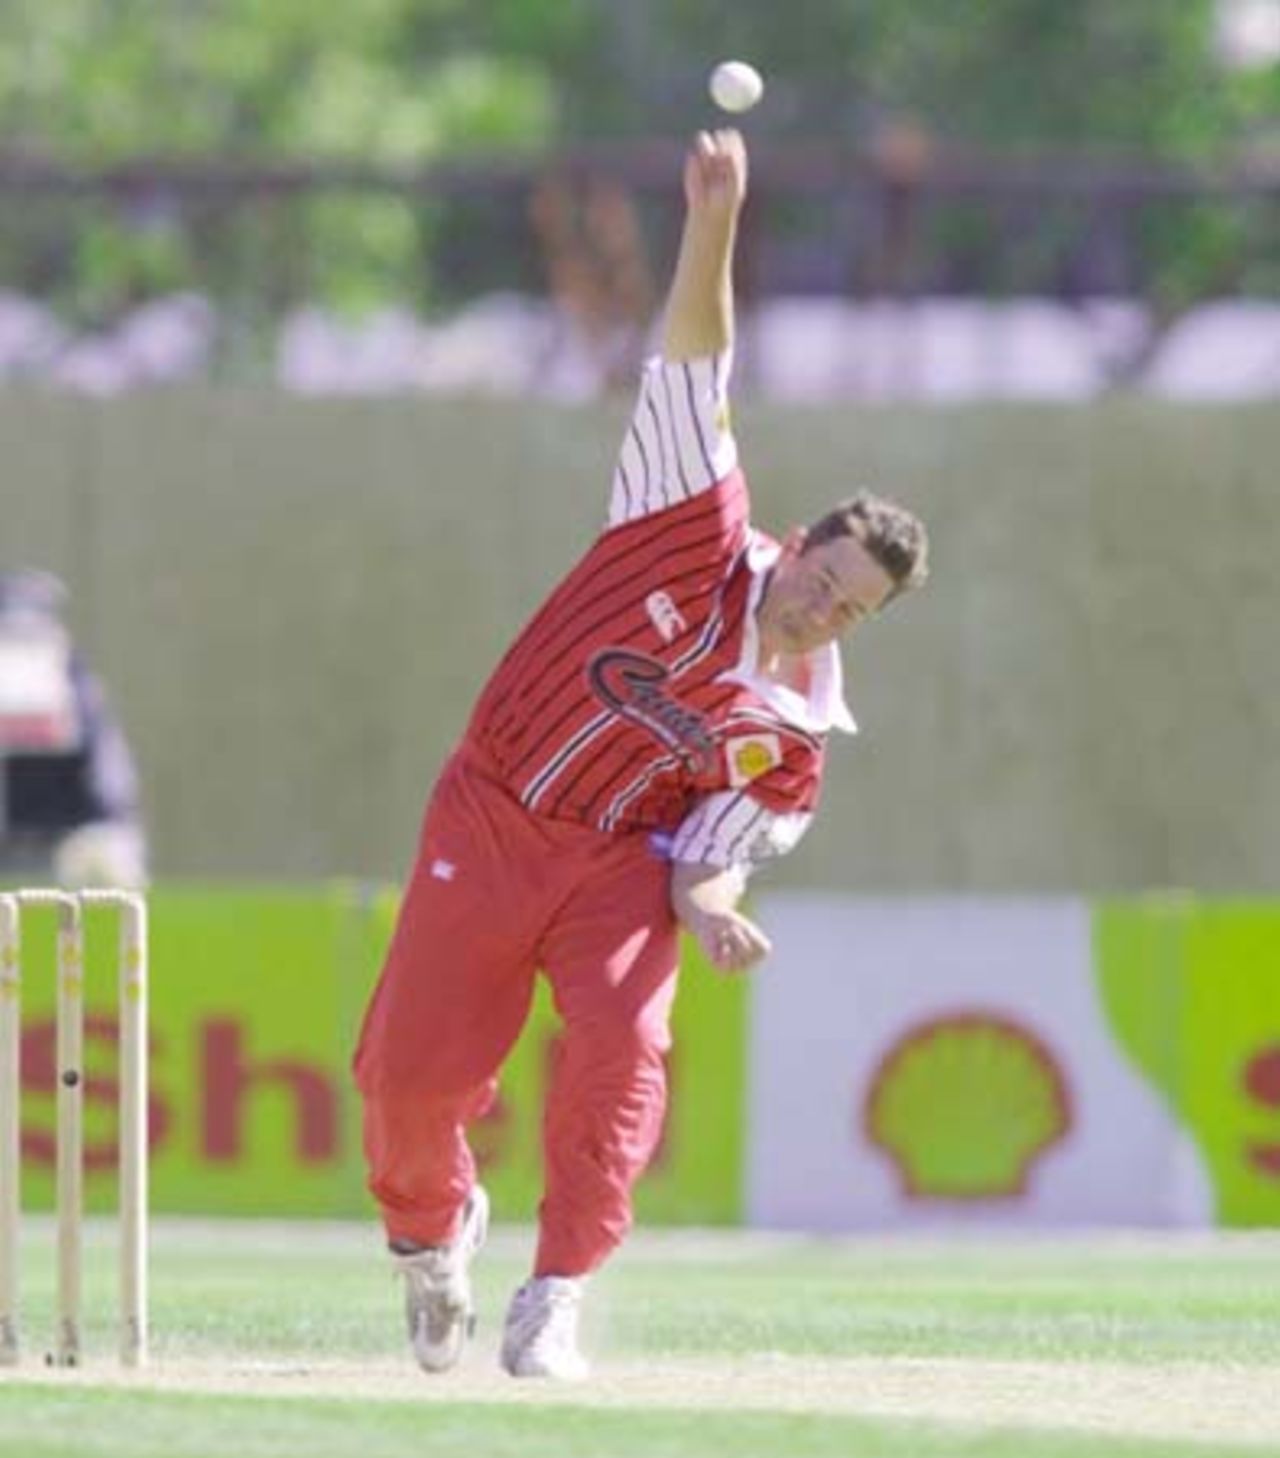 Canterbury bowler Stephen Cunis lets go of a delivery during his spell of 0-12 from five overs. 3rd Shell Cup Final: Canterbury v Central Districts at Jade Stadium, Christchurch, 28 January 2001.